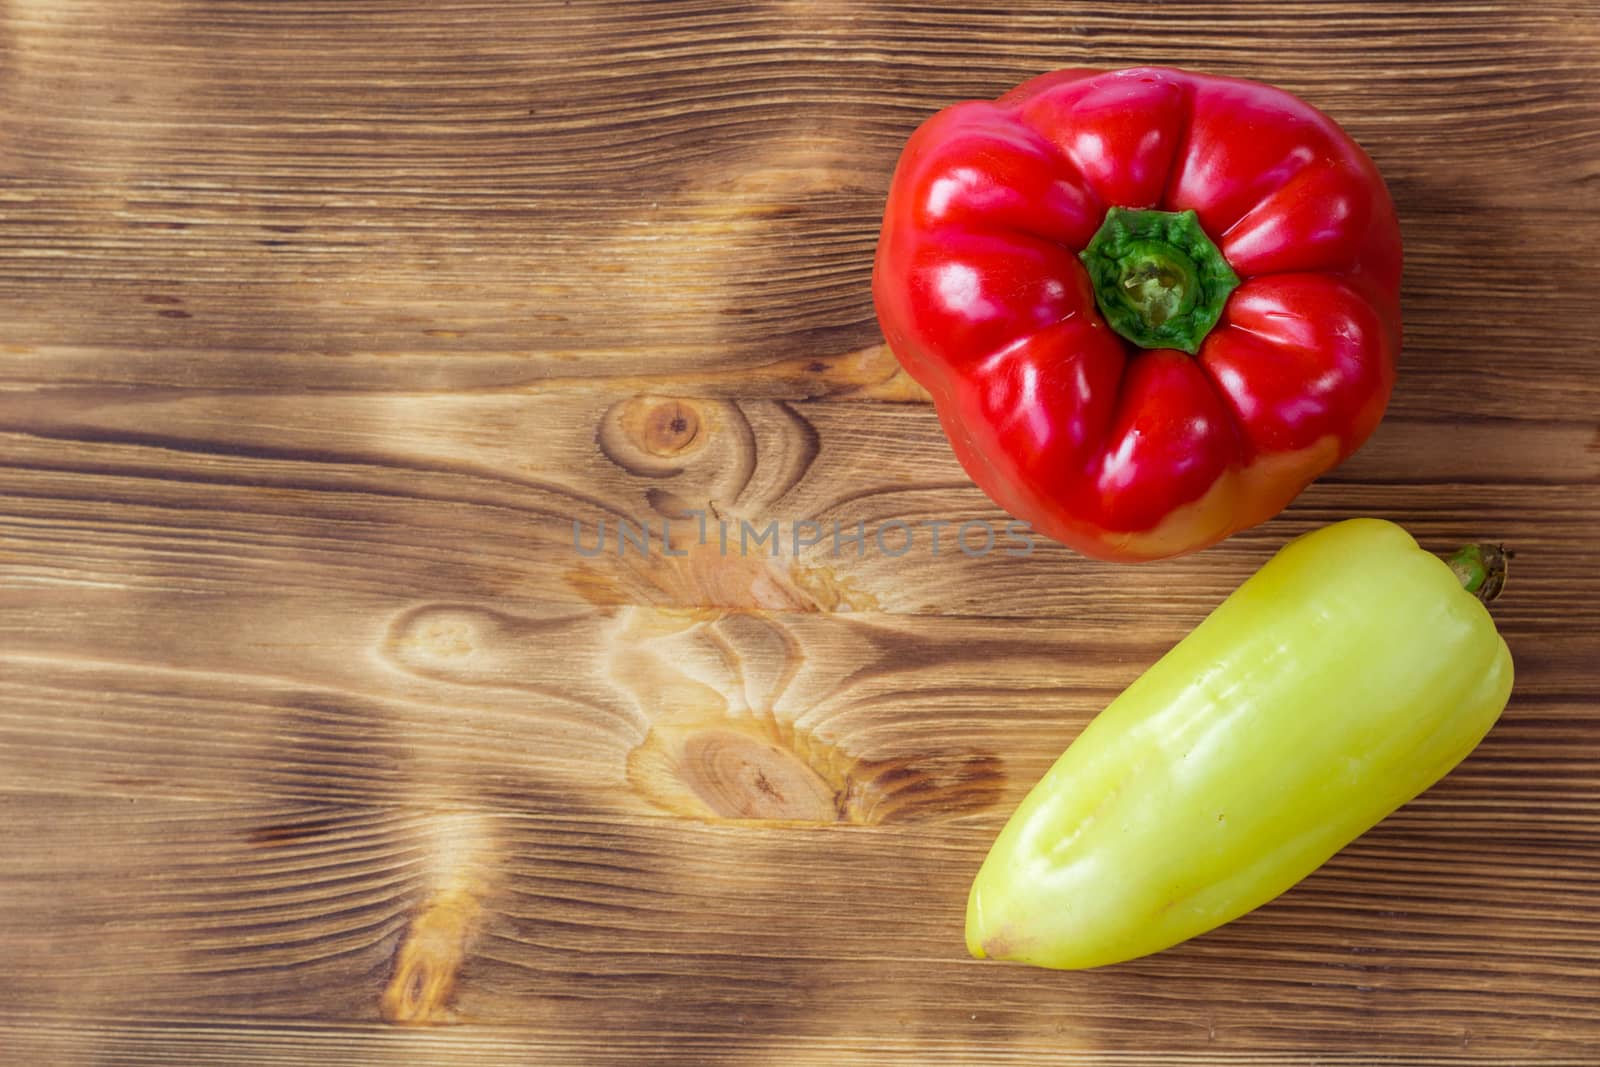 Vegetable background for postcard with two red and green peppers on wooden board